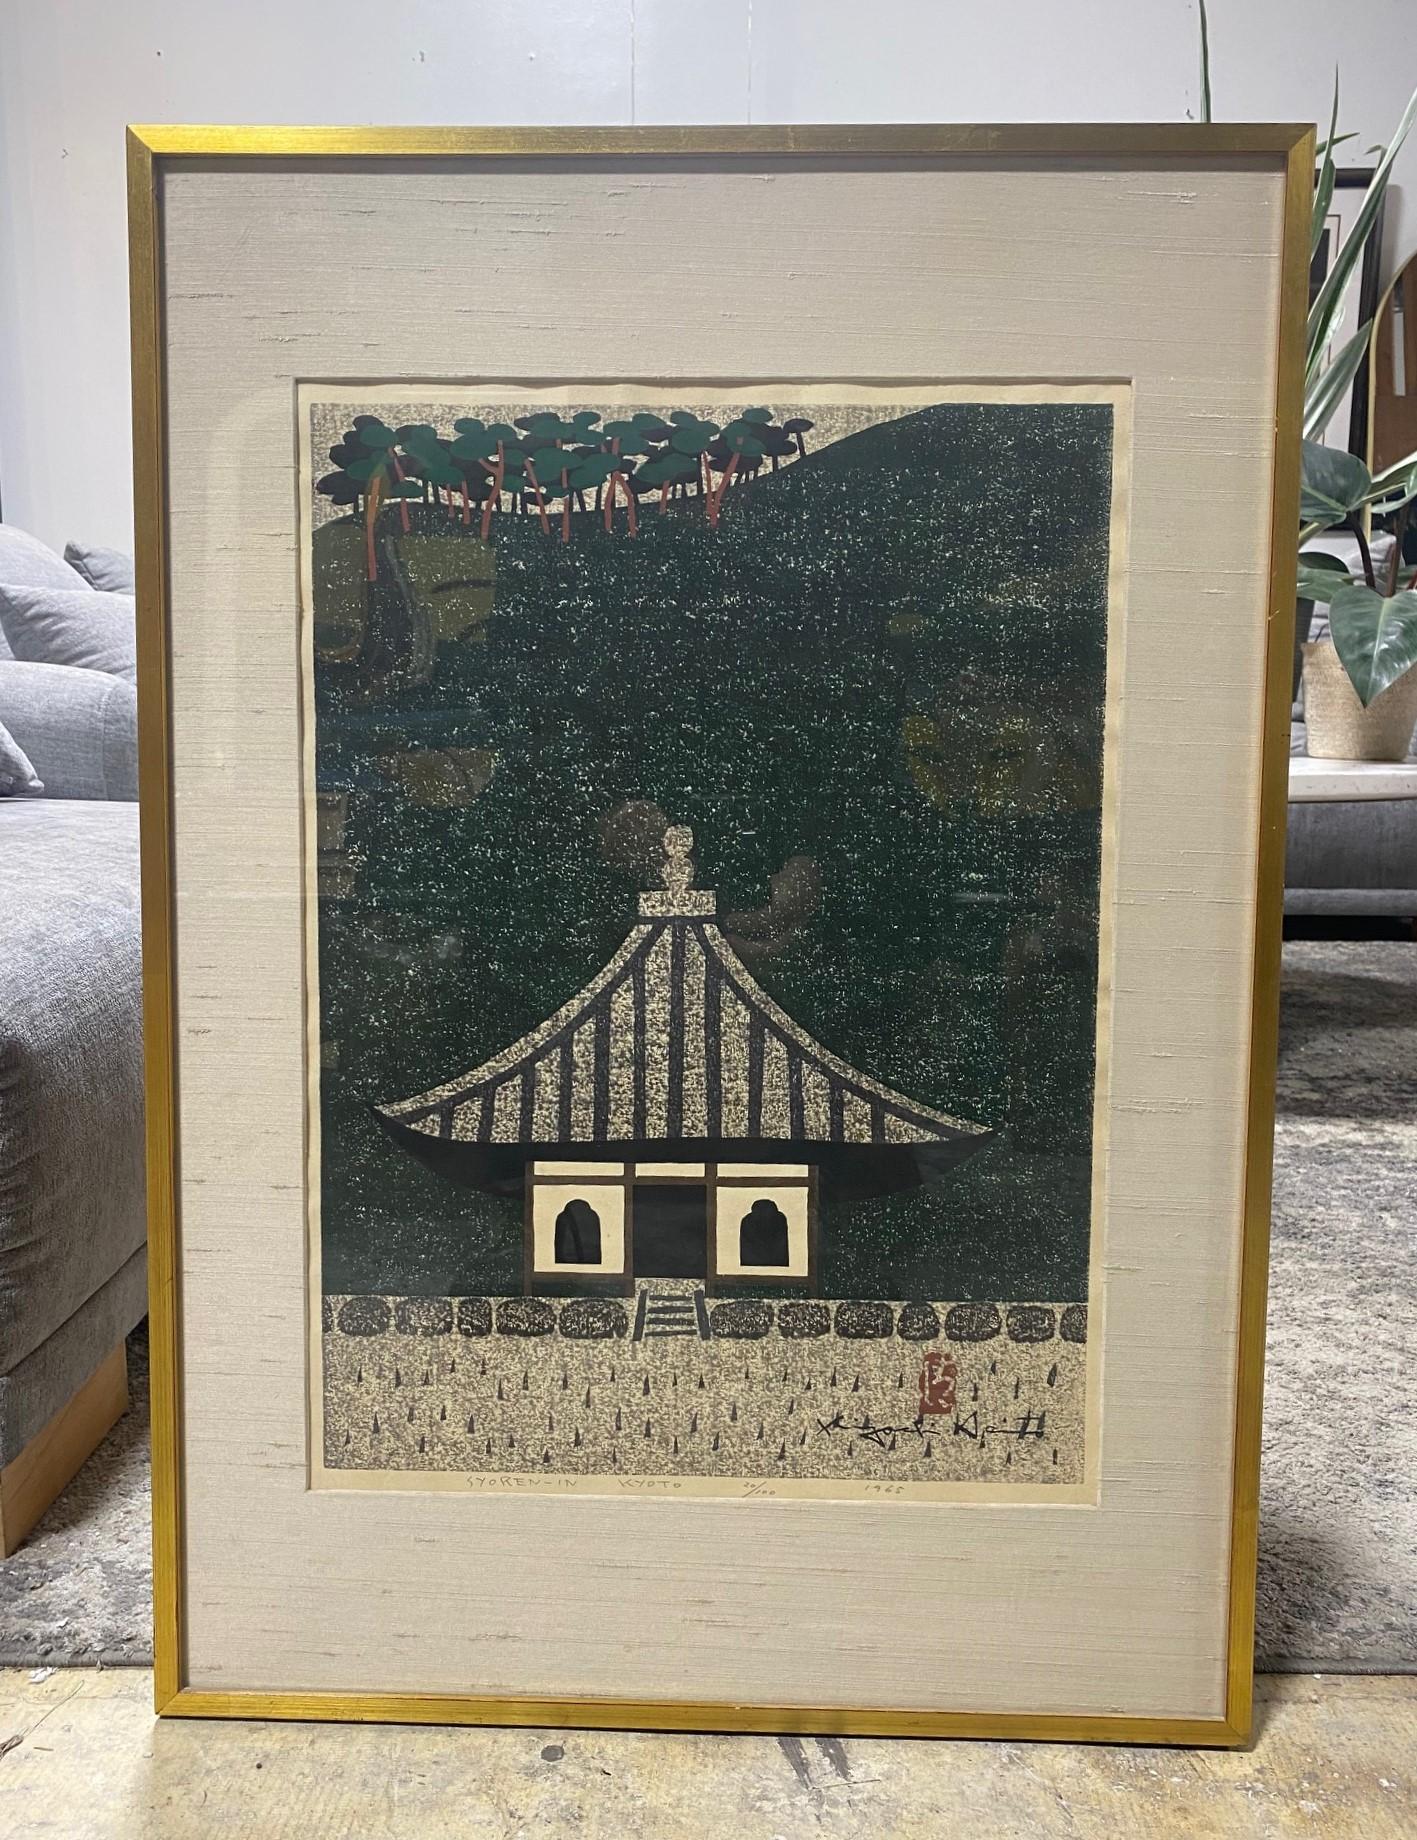 A beautifully designed and composed woodblock print by famed Japanese printmaker Kiyoshi Saito.  Many consider Saito to be one of the most important, if not the most important, contemporary Japanese printmakers of the 20th century. This print, which